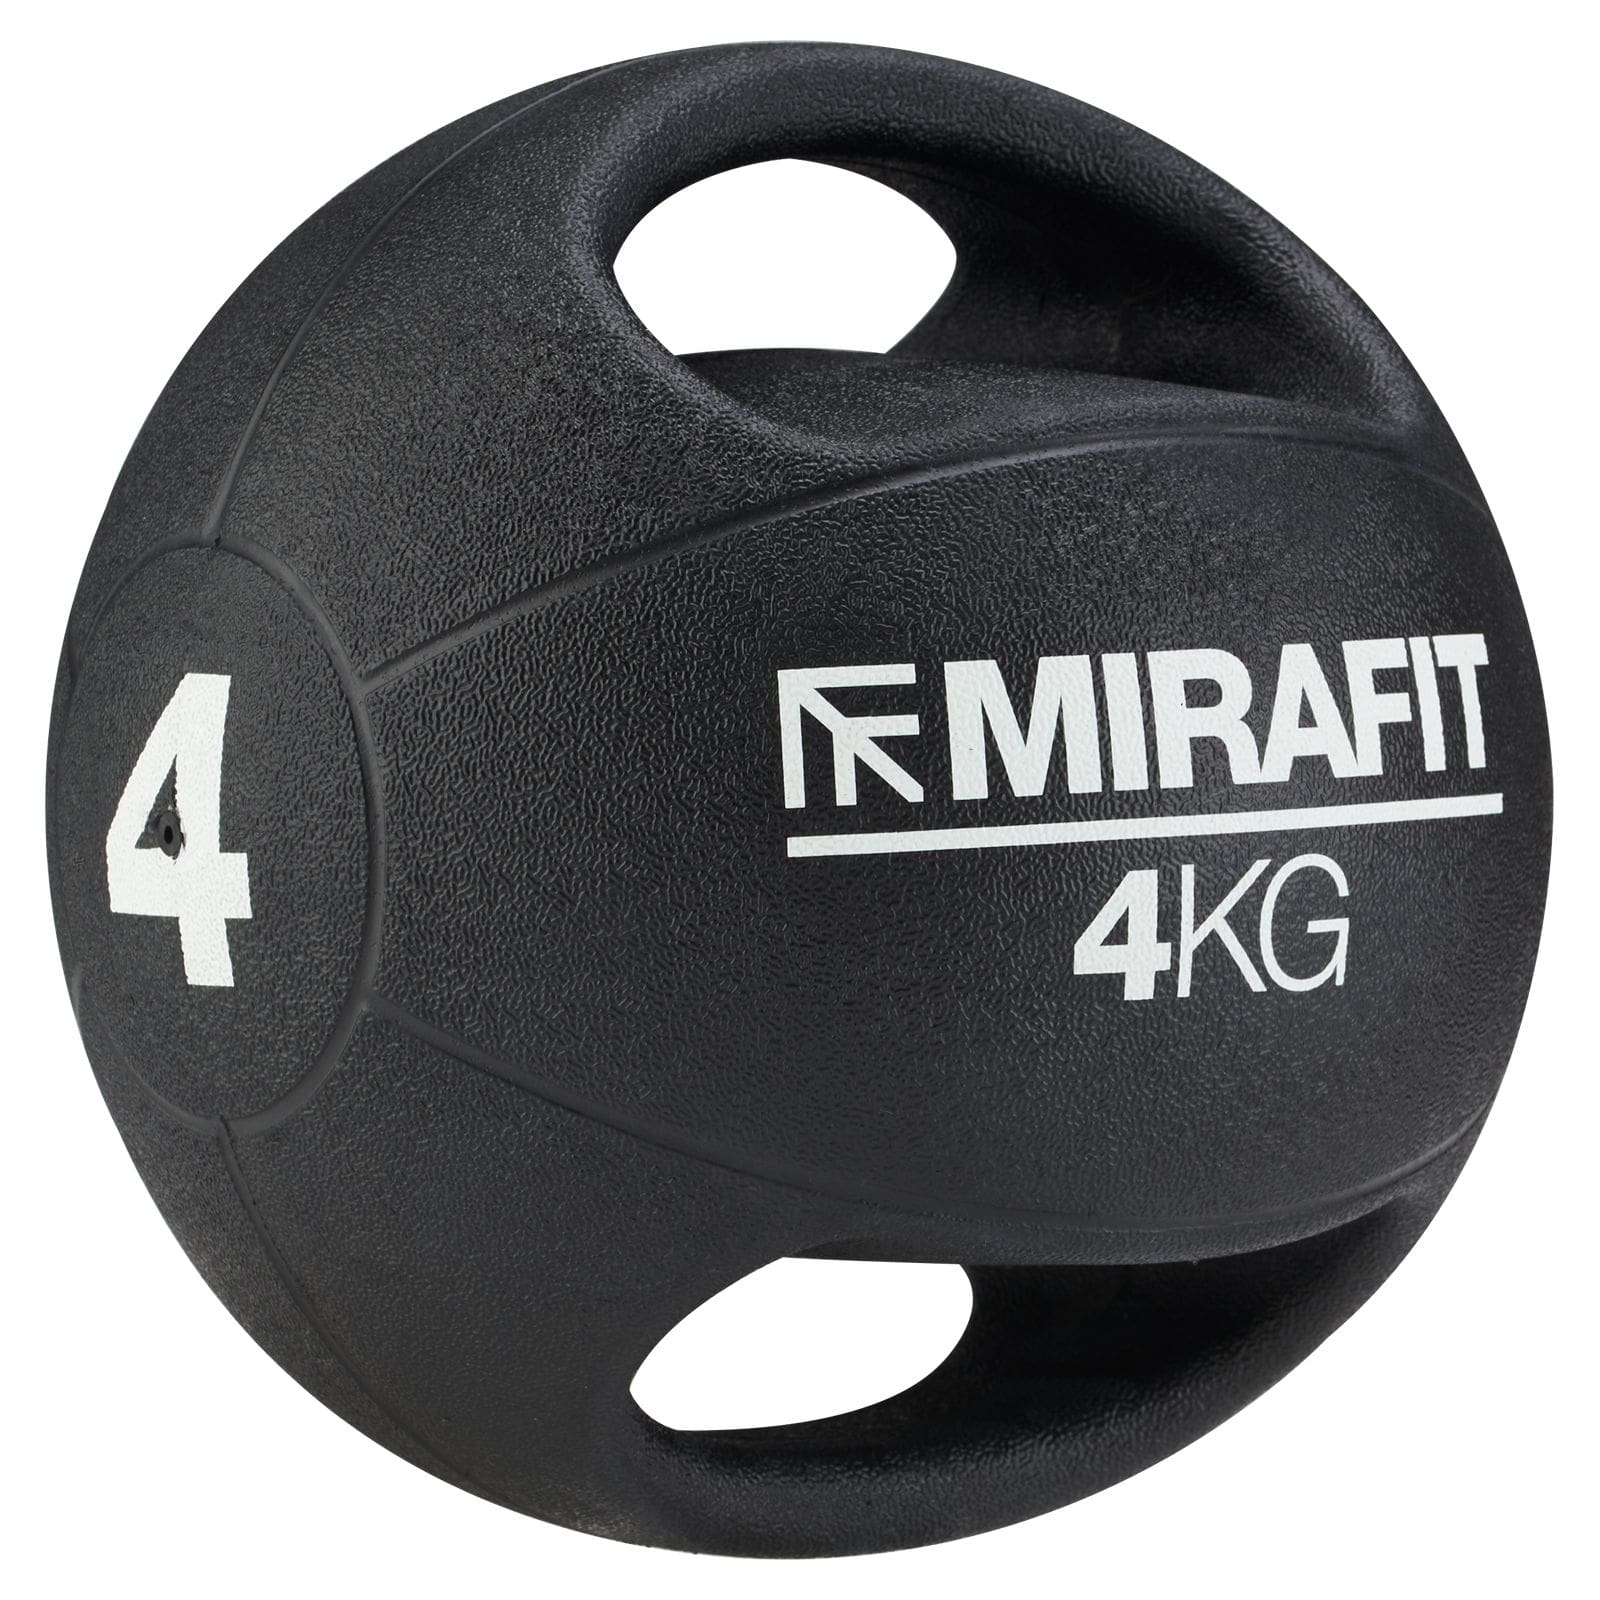 Weights of the Mirafit medicine ball with handles 4kg Review